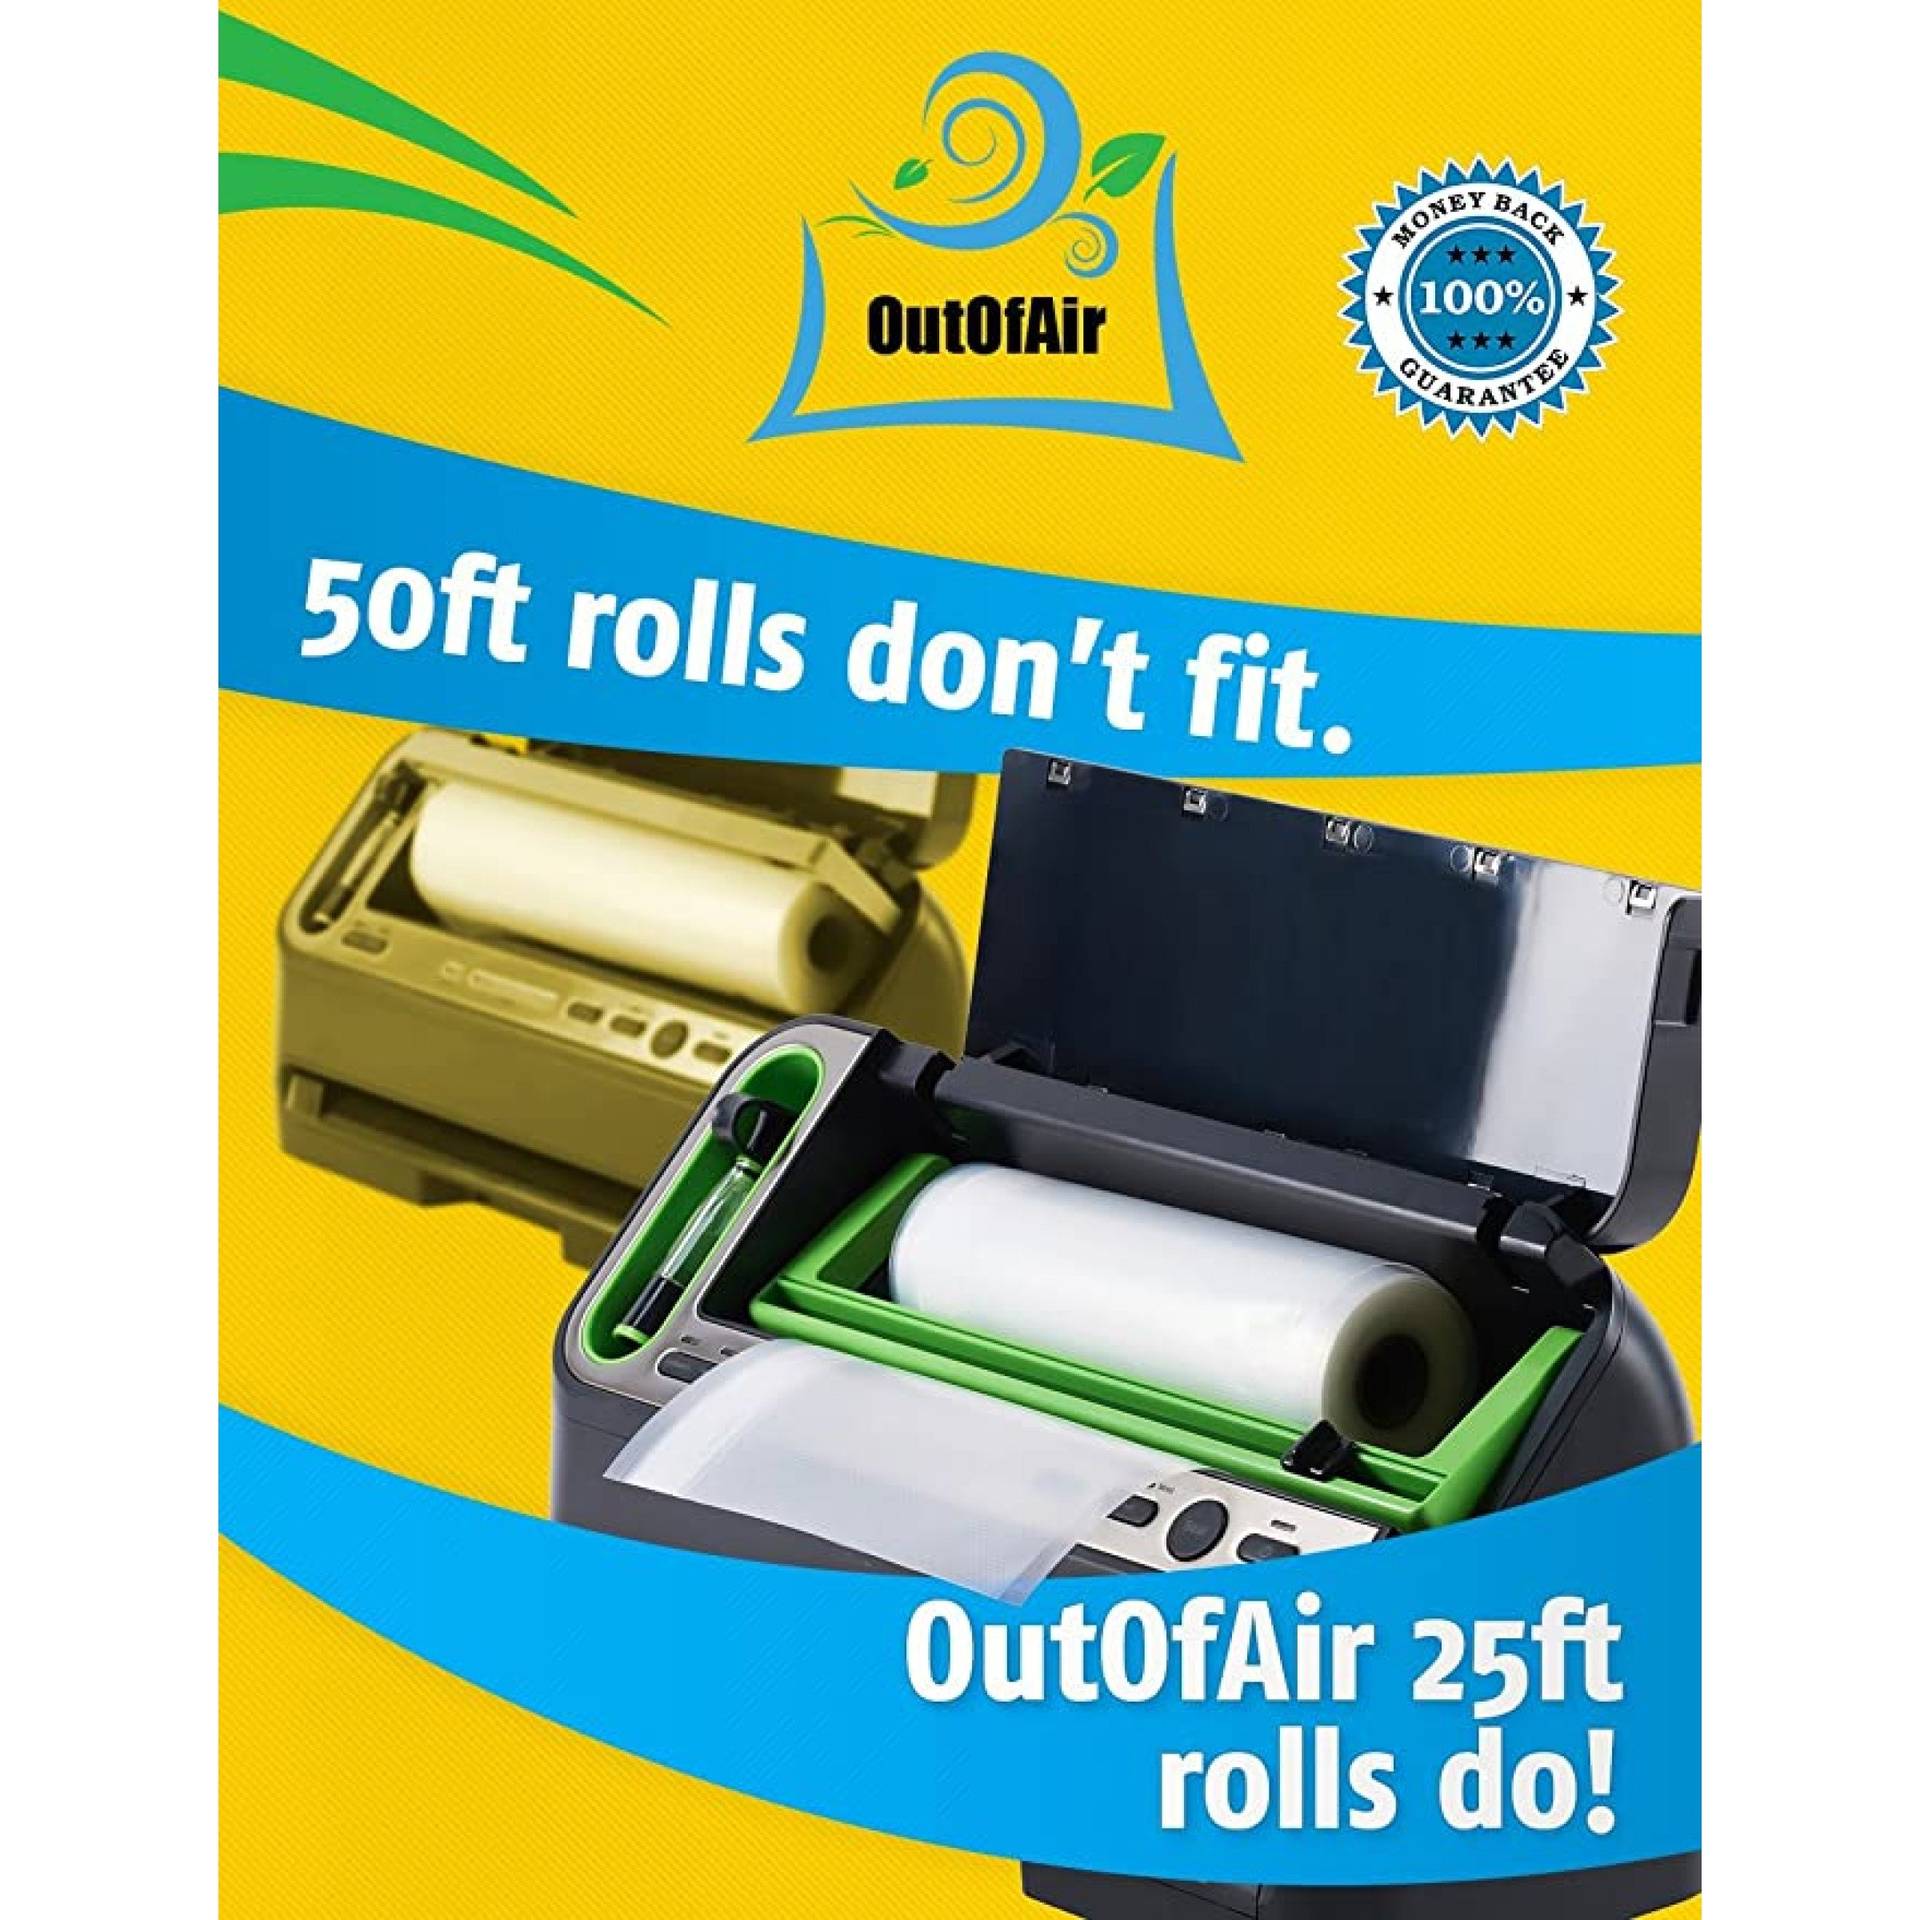 OutOfAir’s 25 ft. seal bags fits most vacuum sealers than 50 ft. rolls do